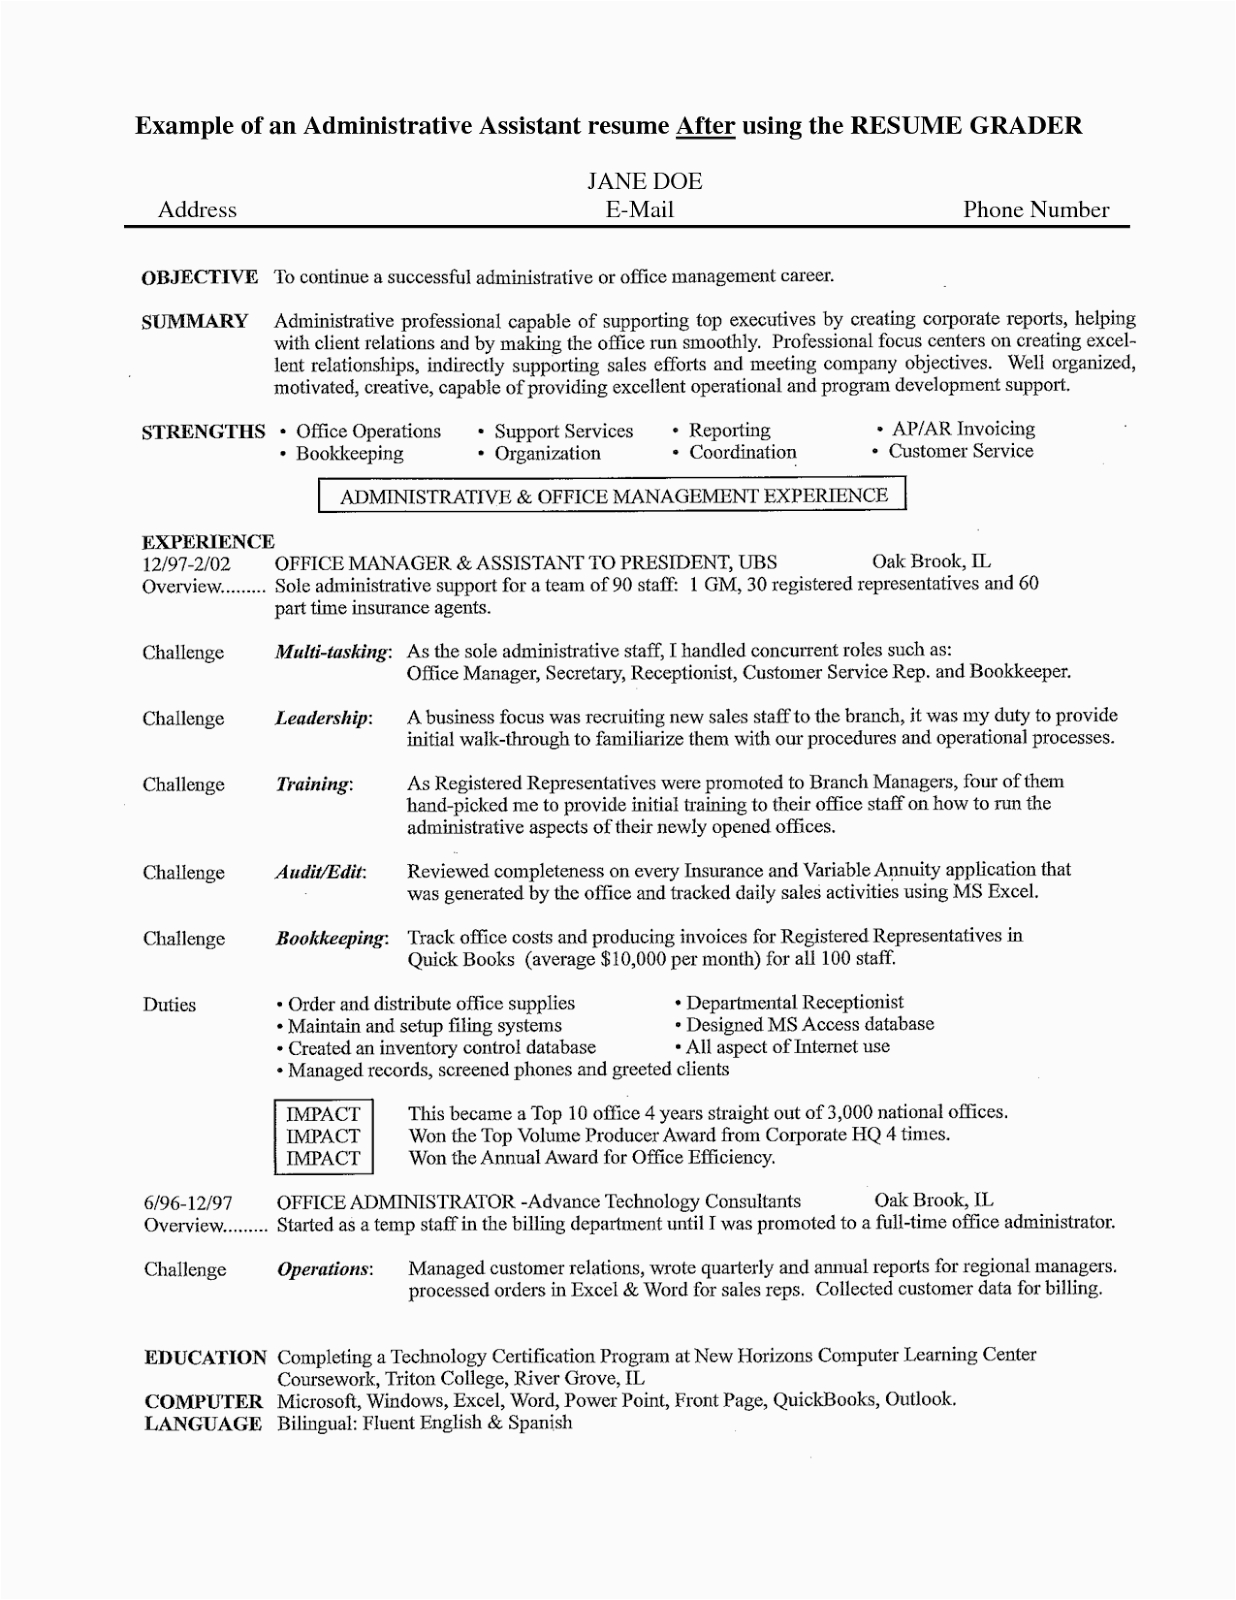 Sample Objective for Executive assistant Resume Sample Objective Resume for Administrative assistant